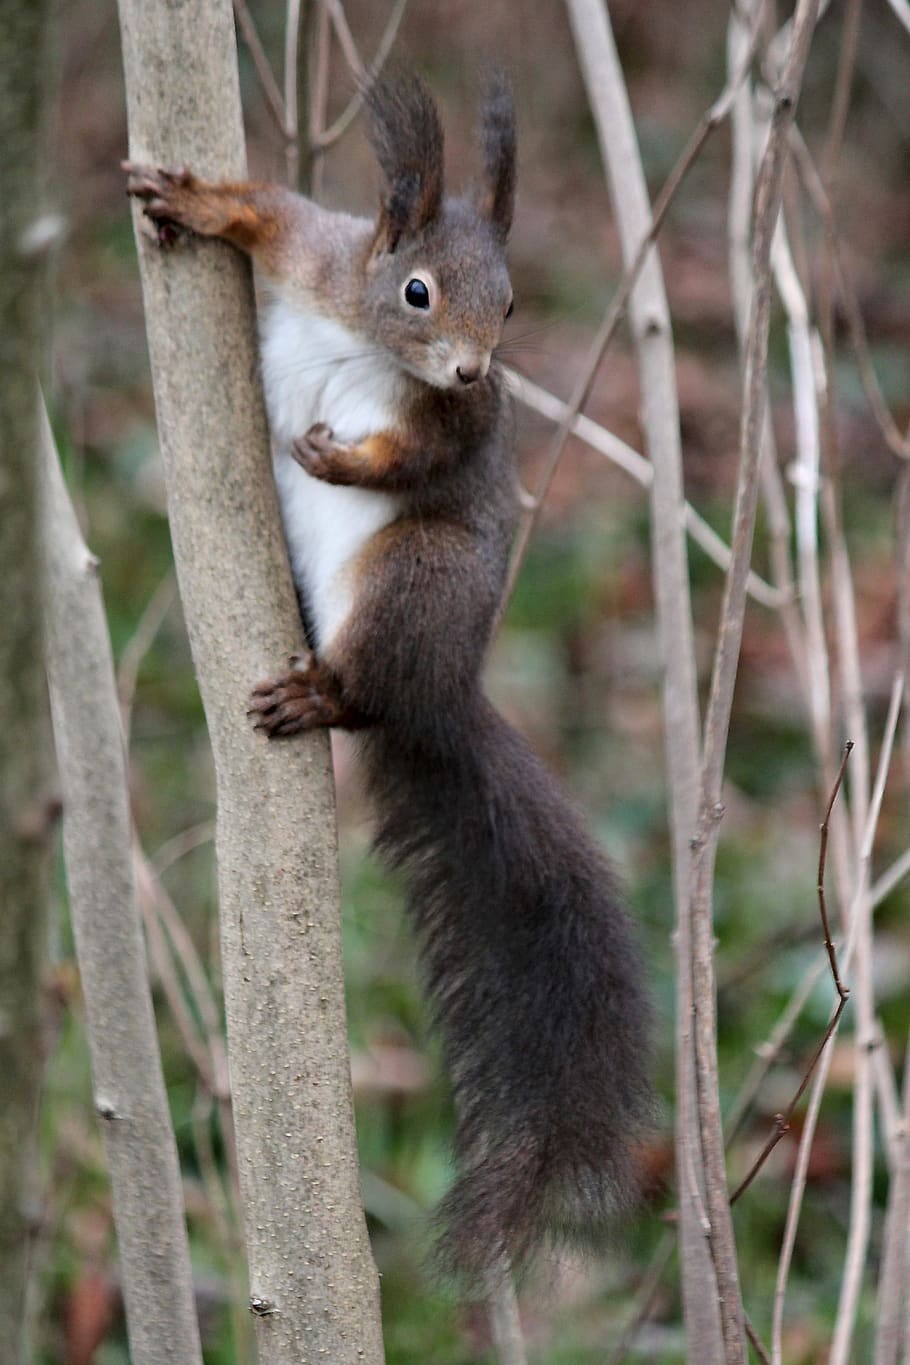 the squirrel, brown, rodent, tree, agile, wild, mammal, animal, curious, animal wildlife